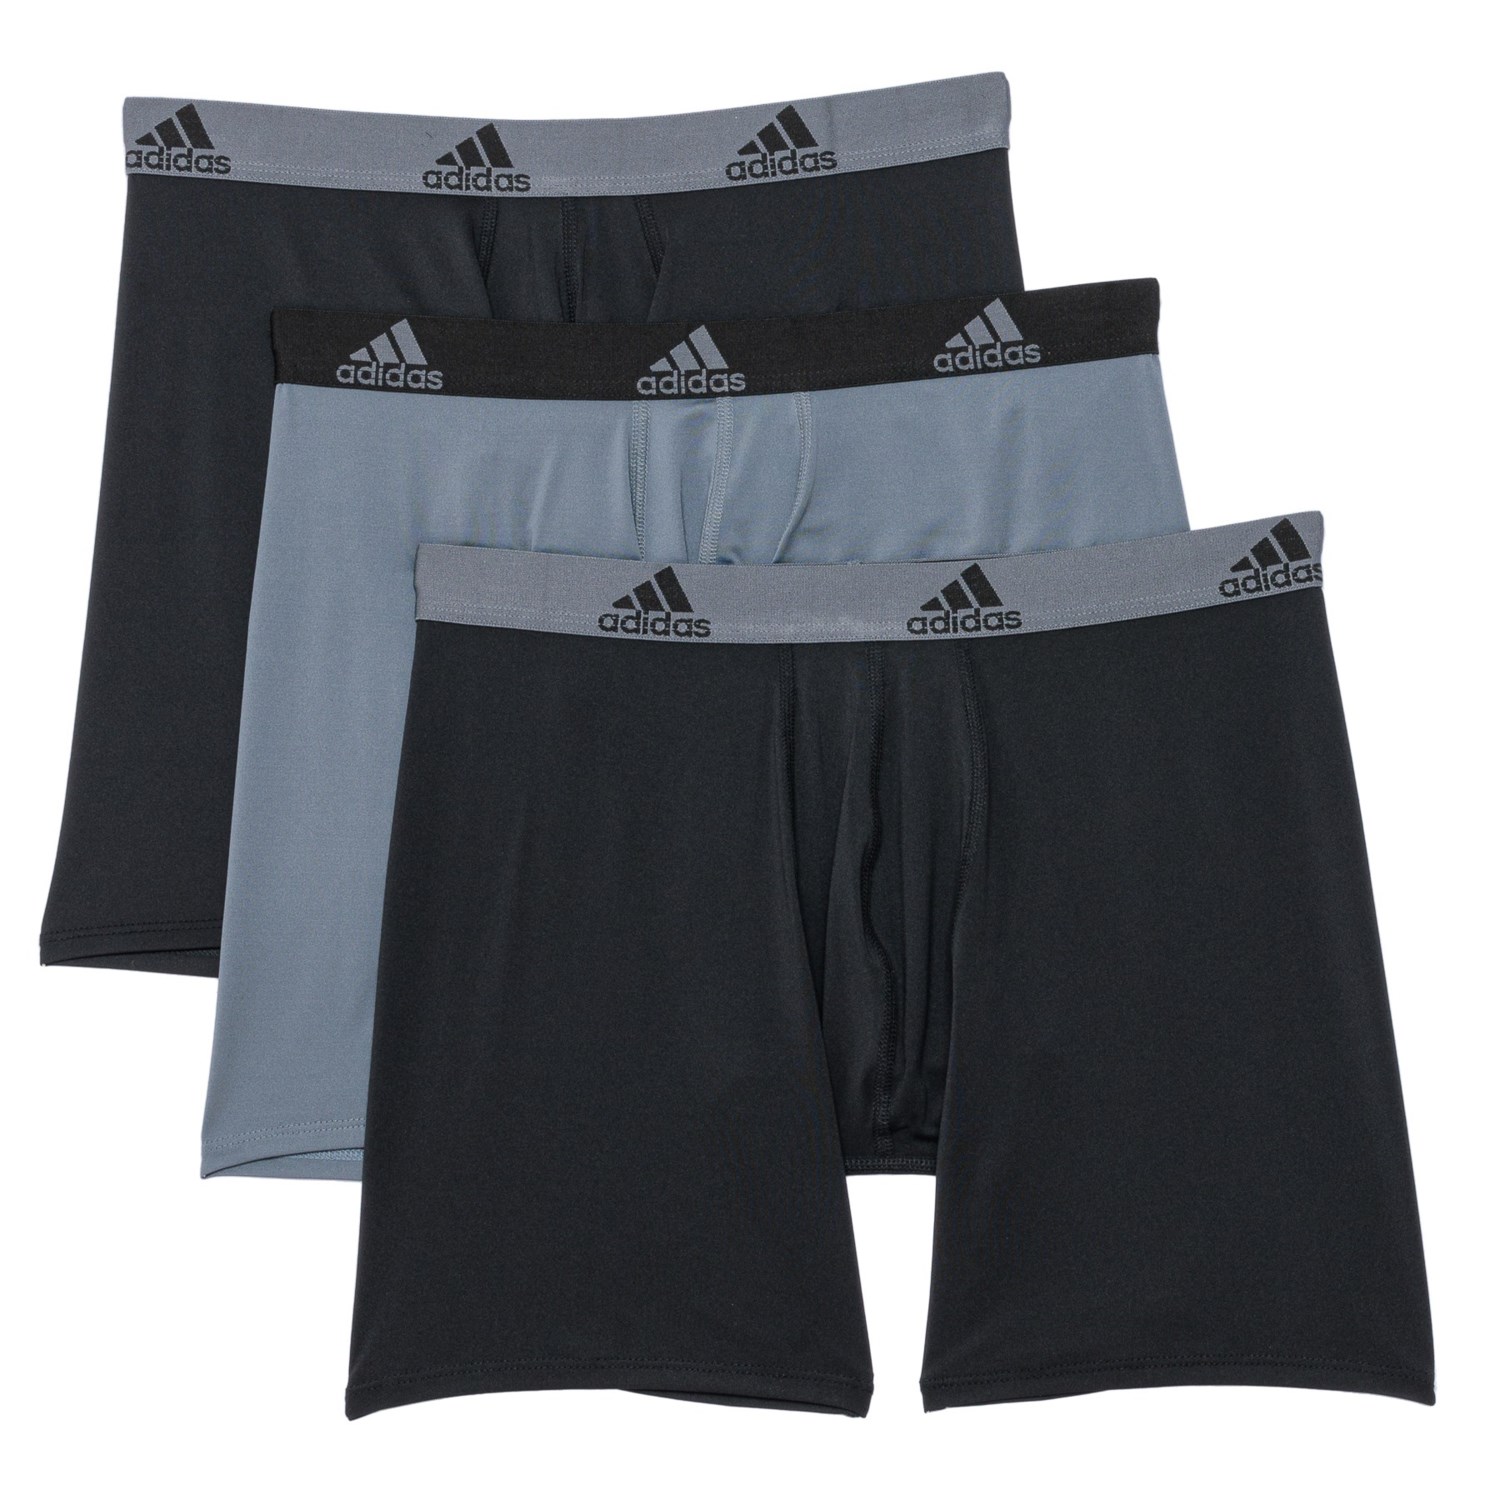 adidas Core-Performance Boxer Briefs - 3-Pack - Save 46%